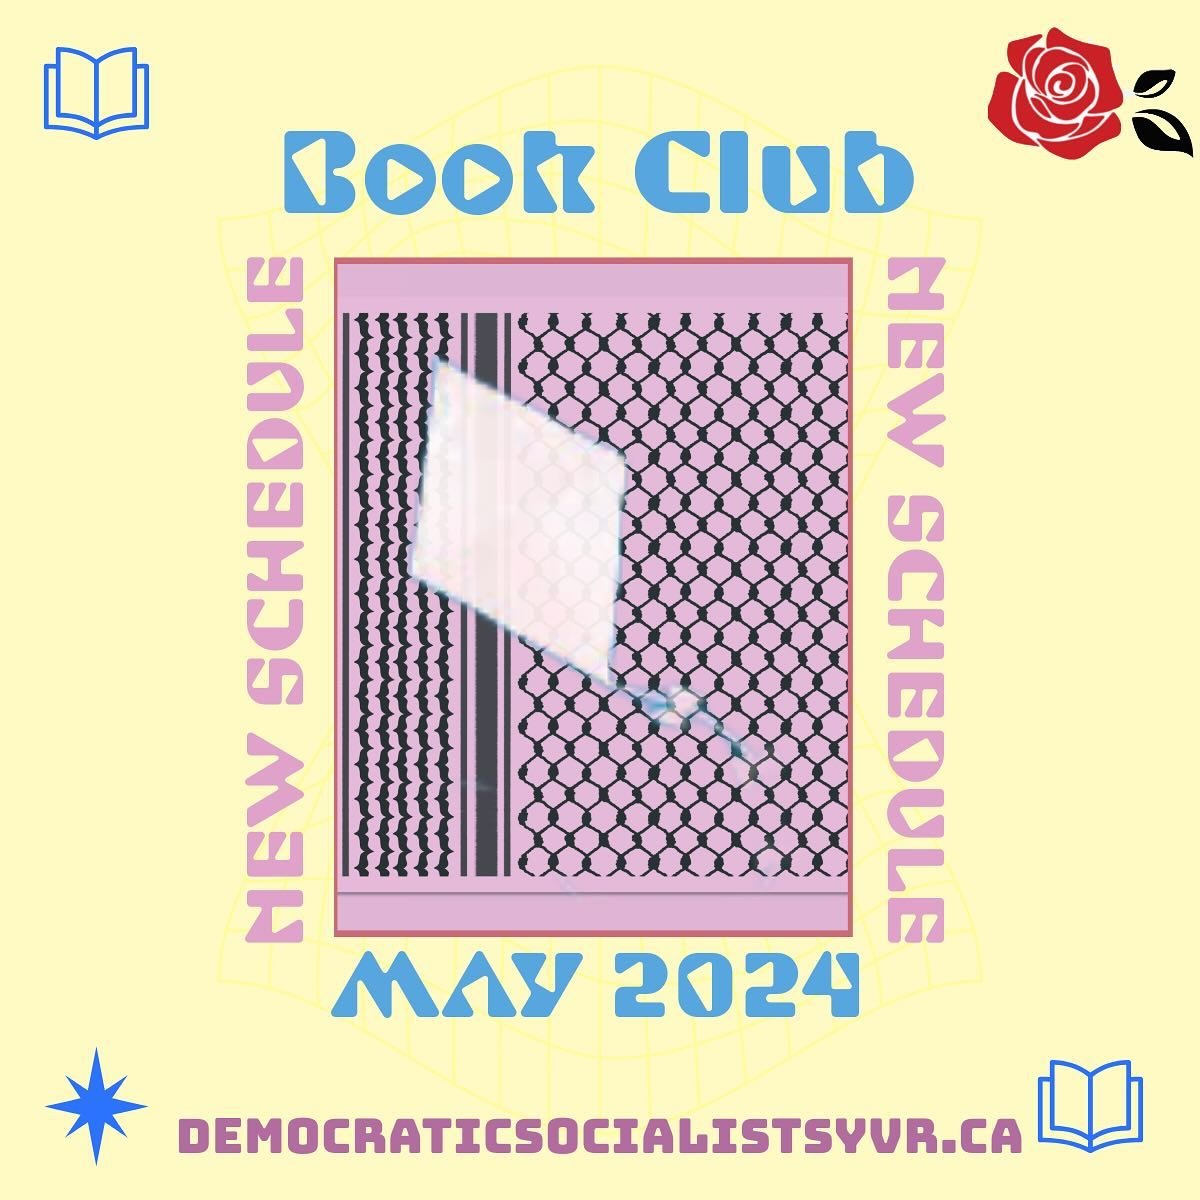 May 2024
Book Club Schedule is now Available
May 1st - no meetup

May 8th - Caliban &amp; the Witch Chapter 4
https://archive.org/details/CalibanAndTheWitchWomenTheBodyAndPrimitiveAccumulation

May 15th - Expanding Democratic Employee Ownership in Ca